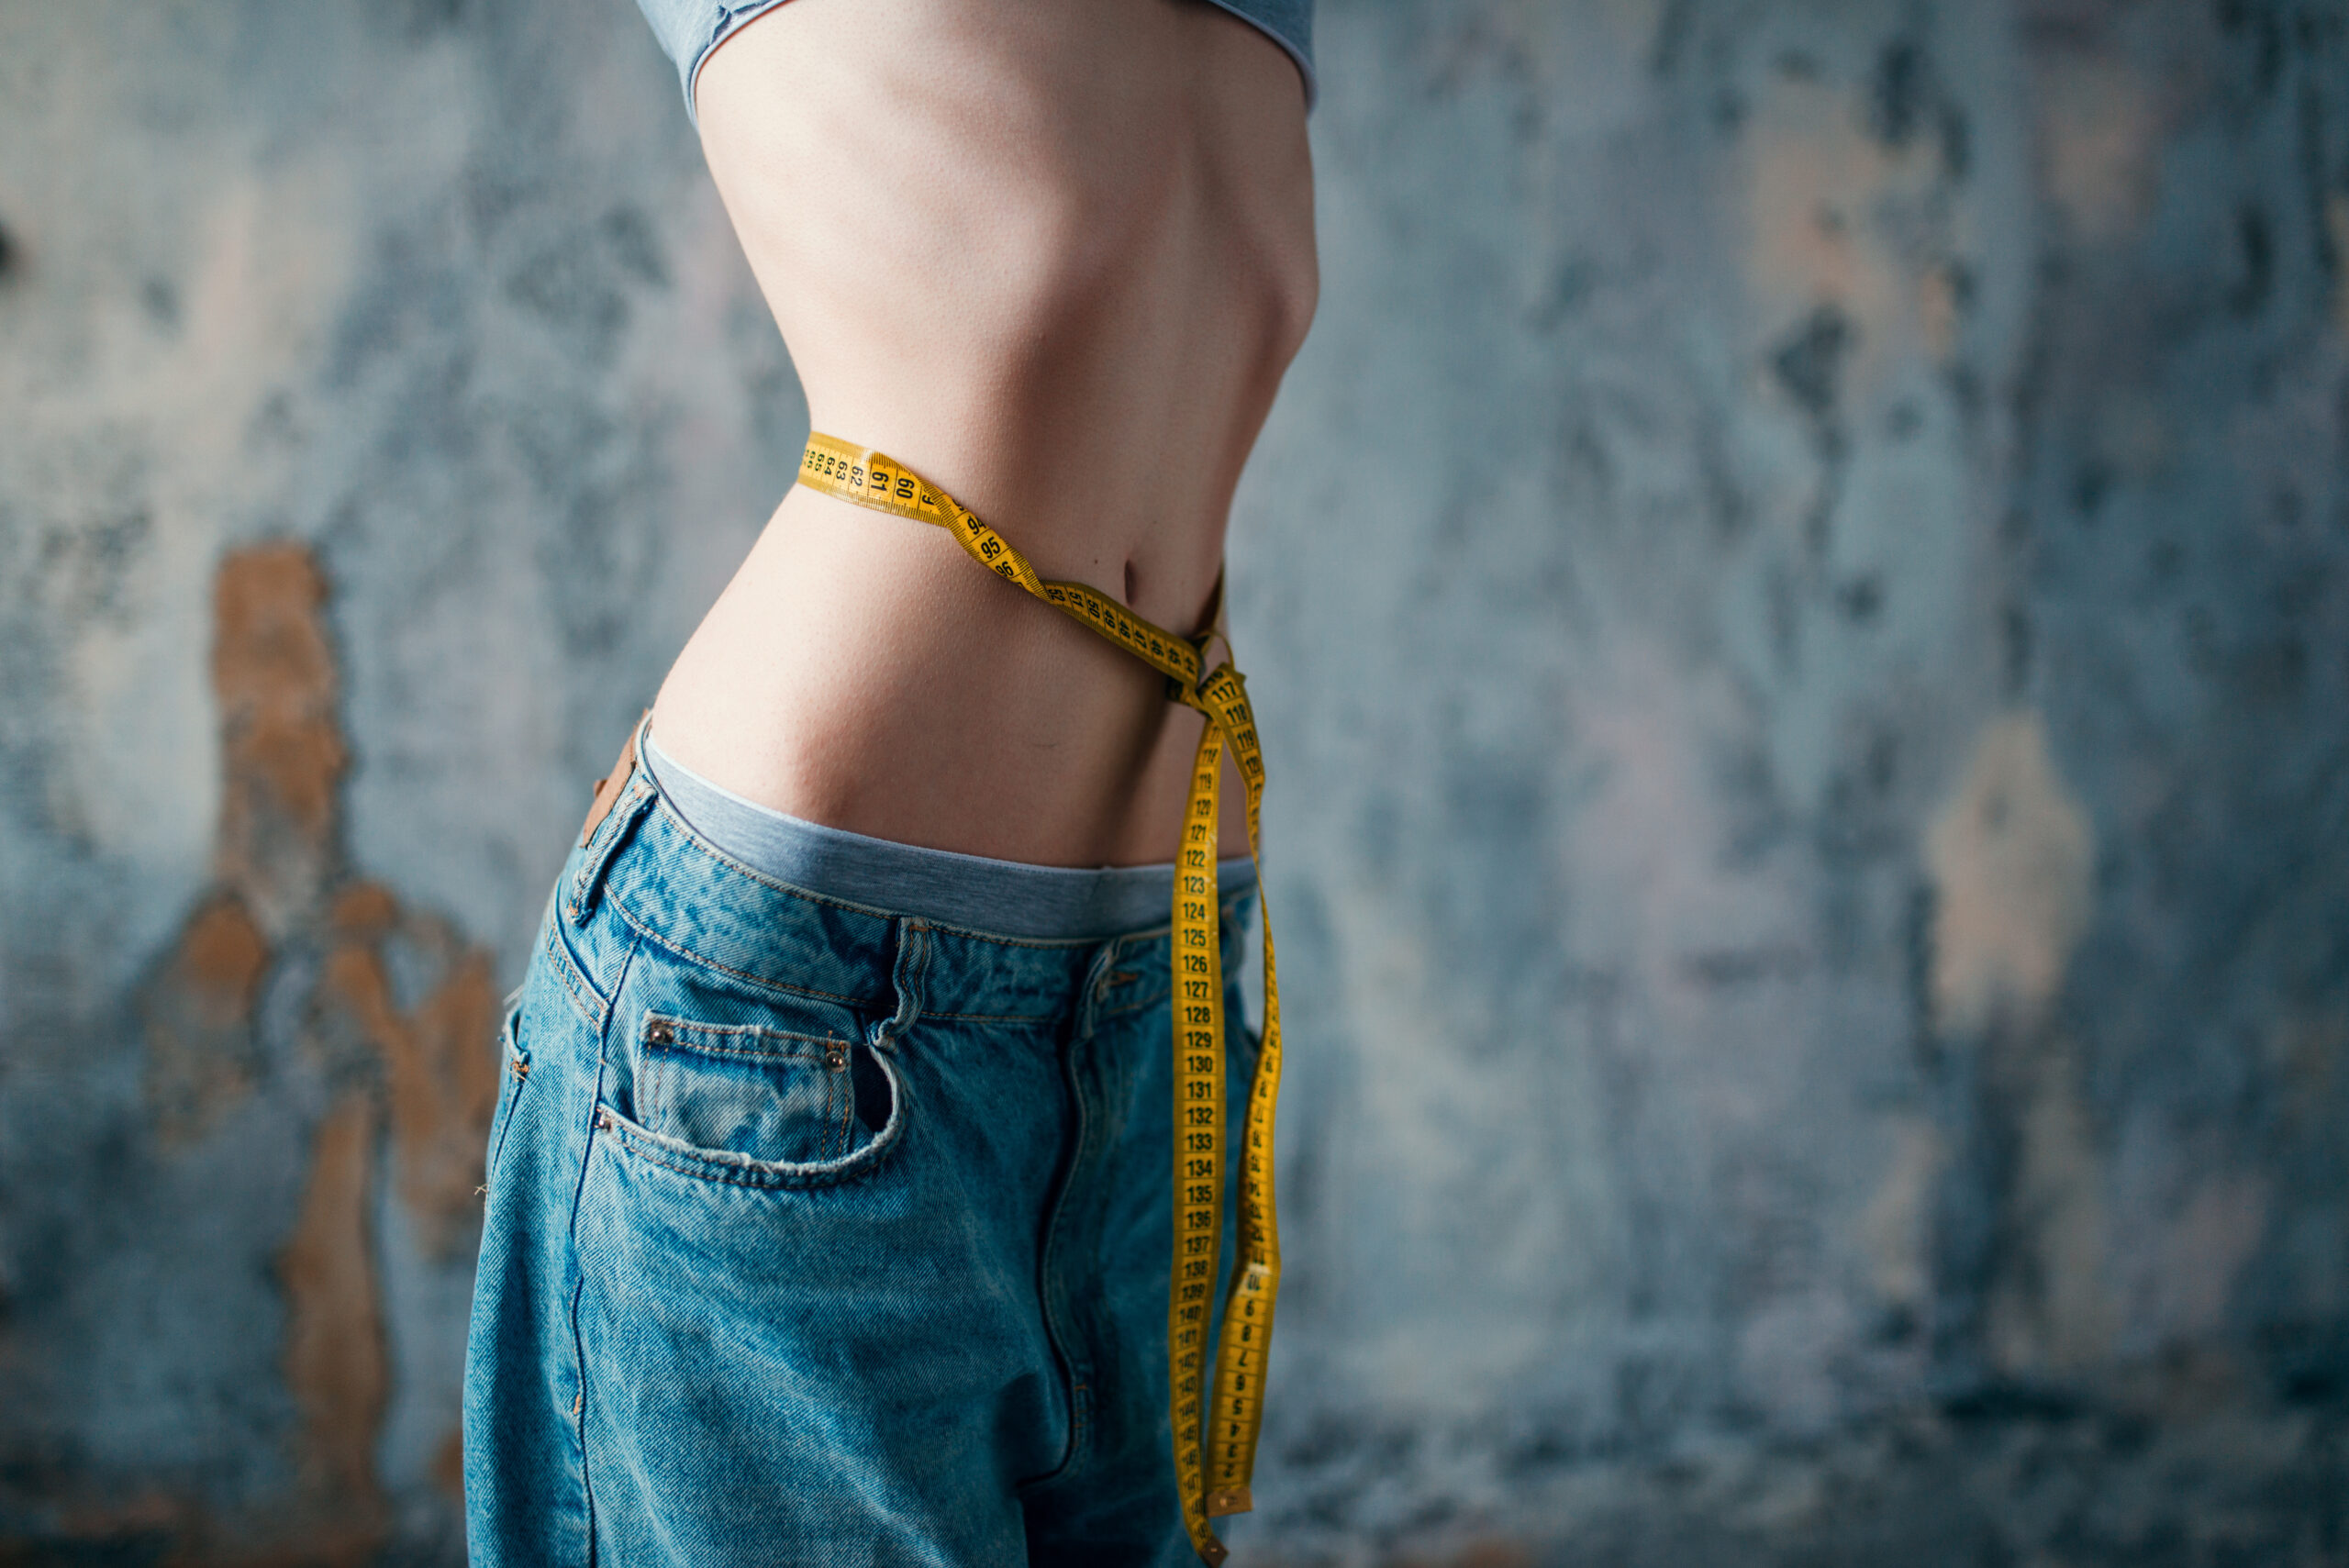 Thin woman in jeans measures her waist, weight loss, anorexia. Fat or calories burning concept, medical illness